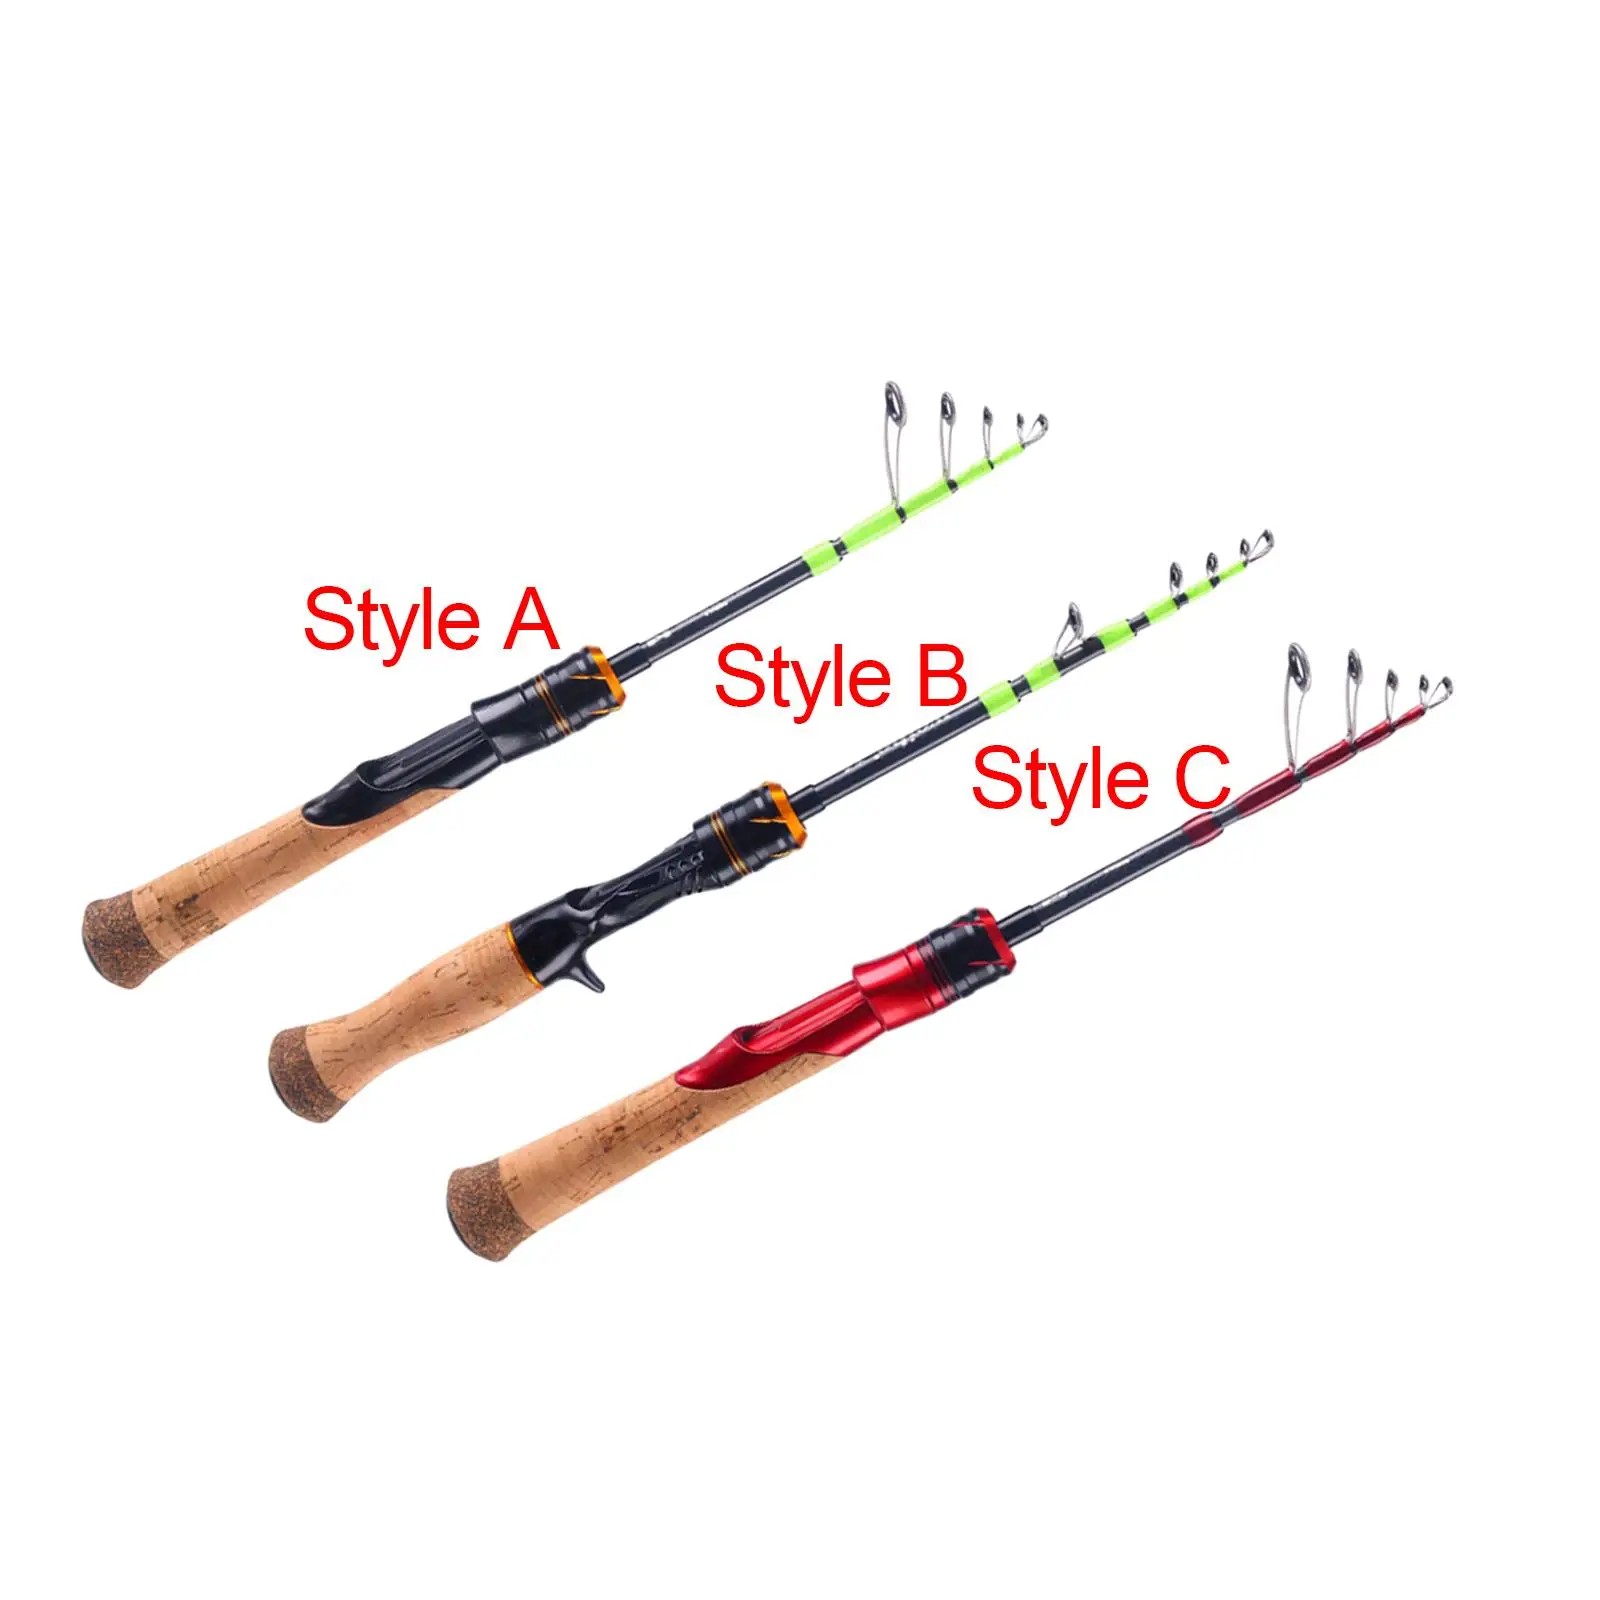 Telescopic Fishing Rod Nonslip Handle for Trout Reservoirs Fishing Gears